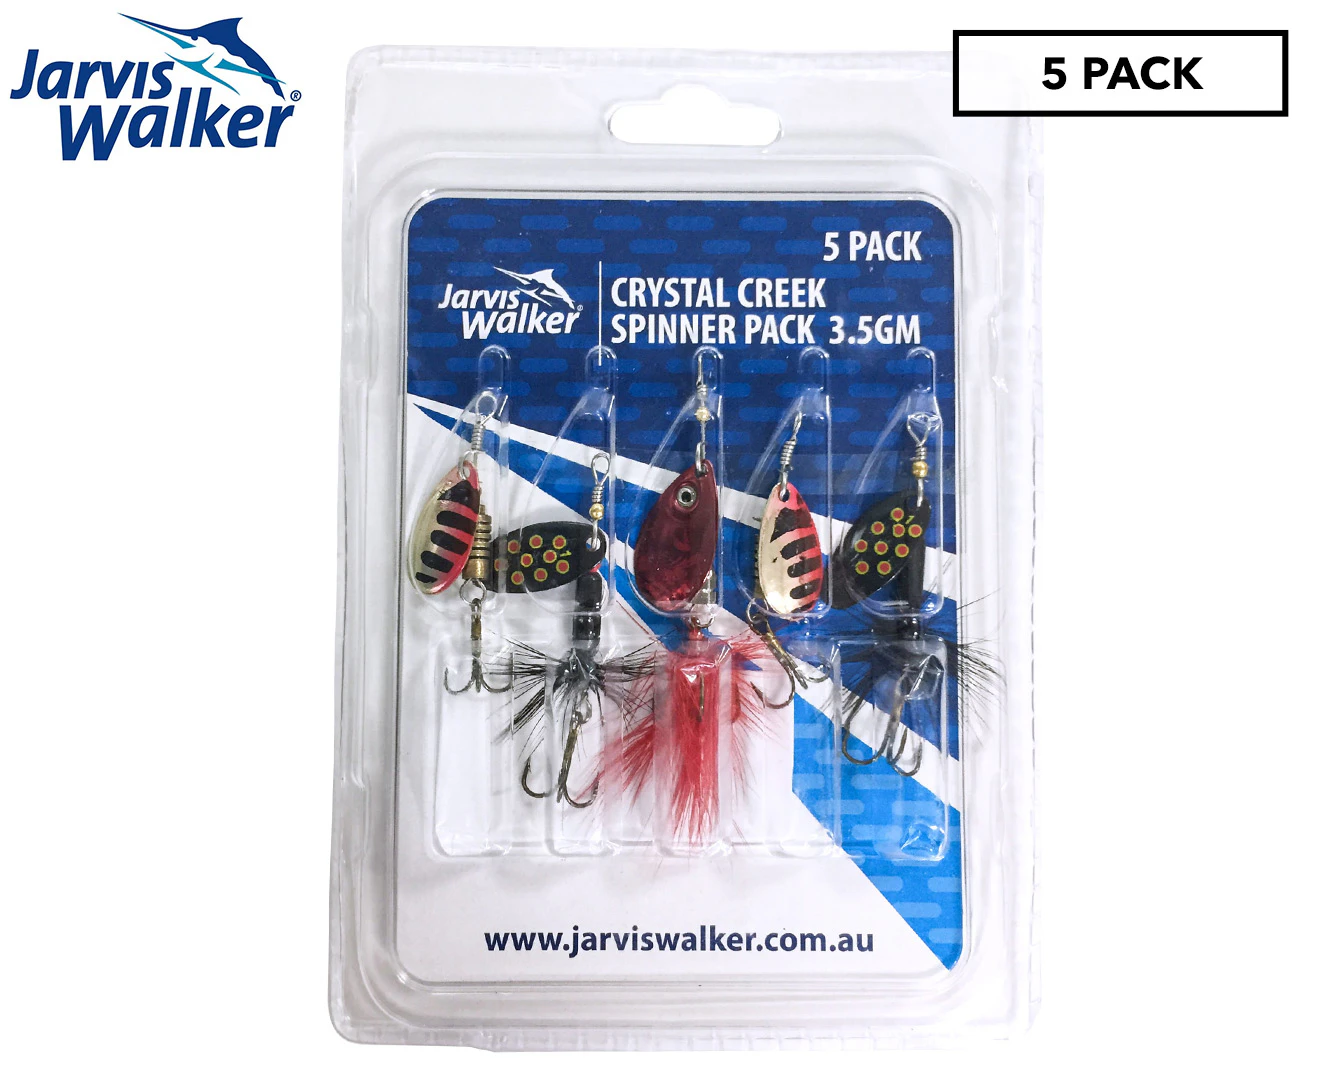 Fishing Tackle Australia SALE - right here at Catch!